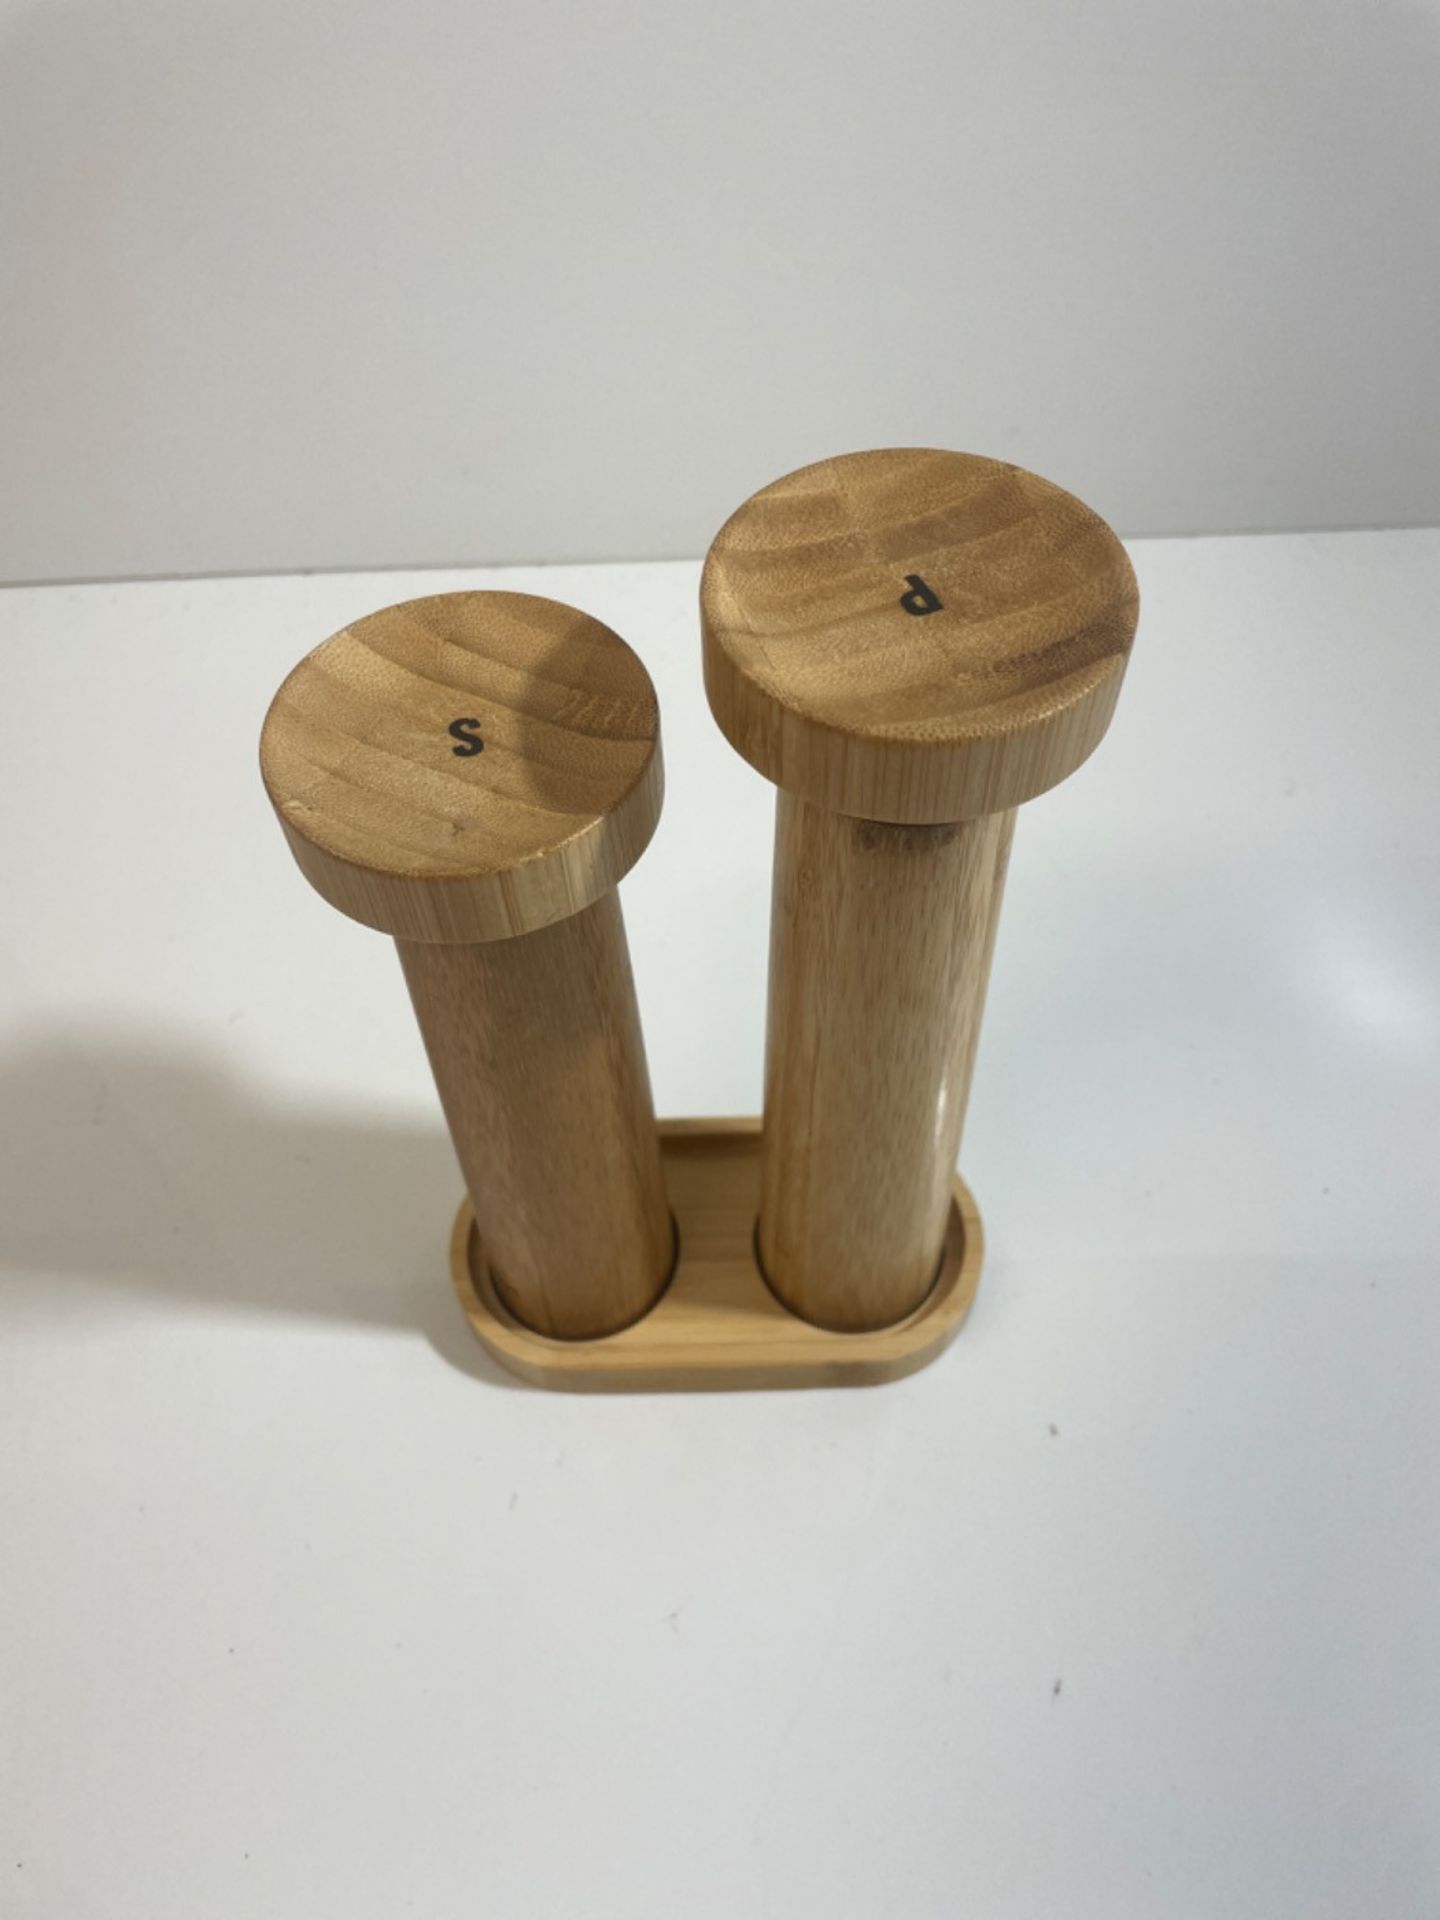 Salter 7614 WDXR Eco Bamboo Salt & Pepper Grinder Set - Solid Bamboo Mills With Stand, Manual Twi... - Image 3 of 3